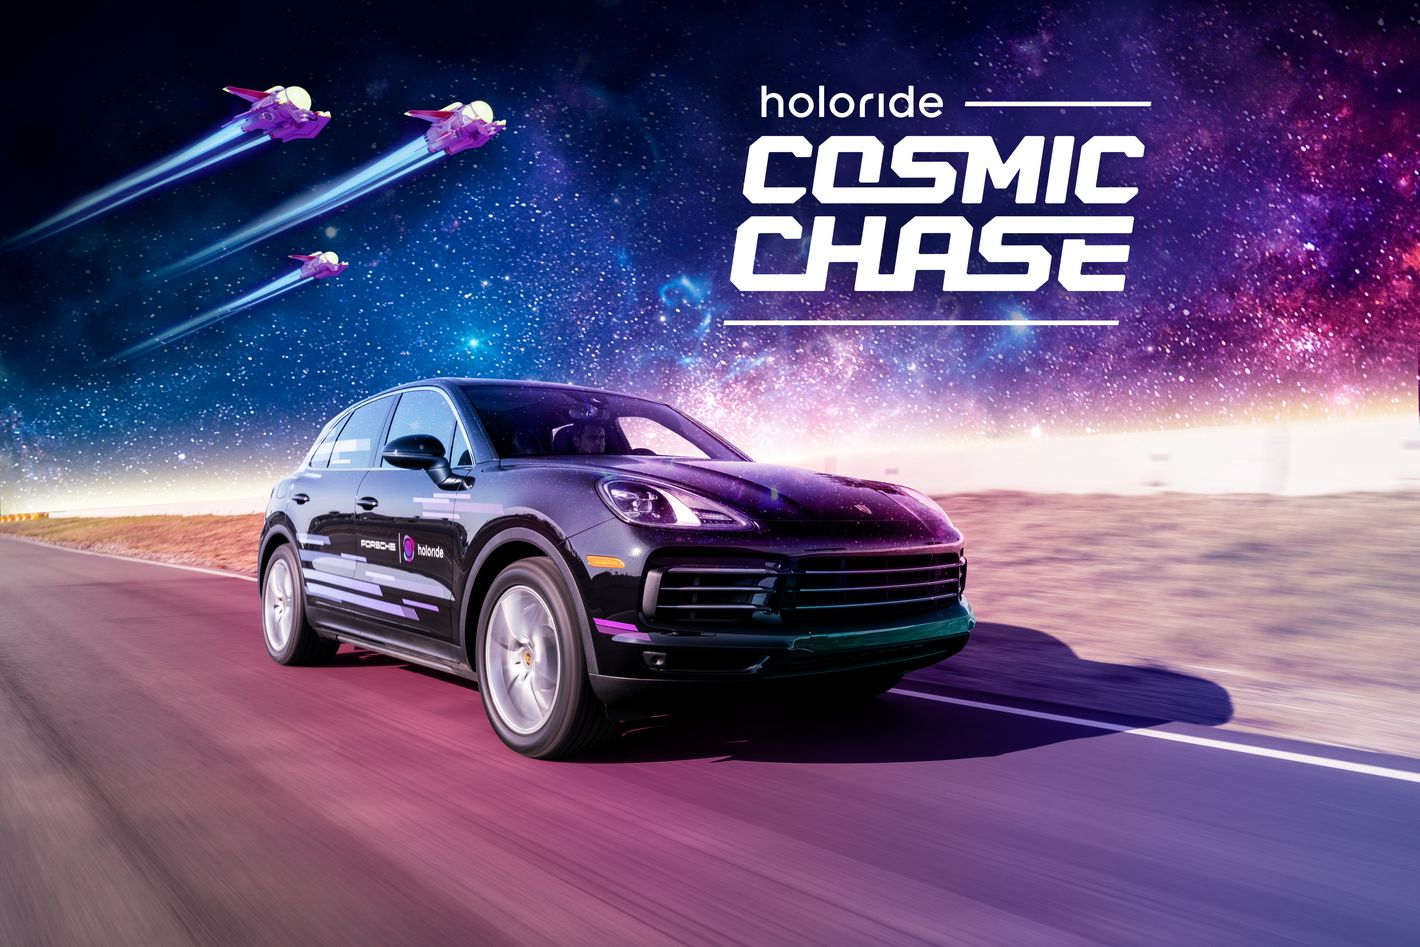 Porsche Cayenne with holoride branding, driving around and playing Cosmic Chase game